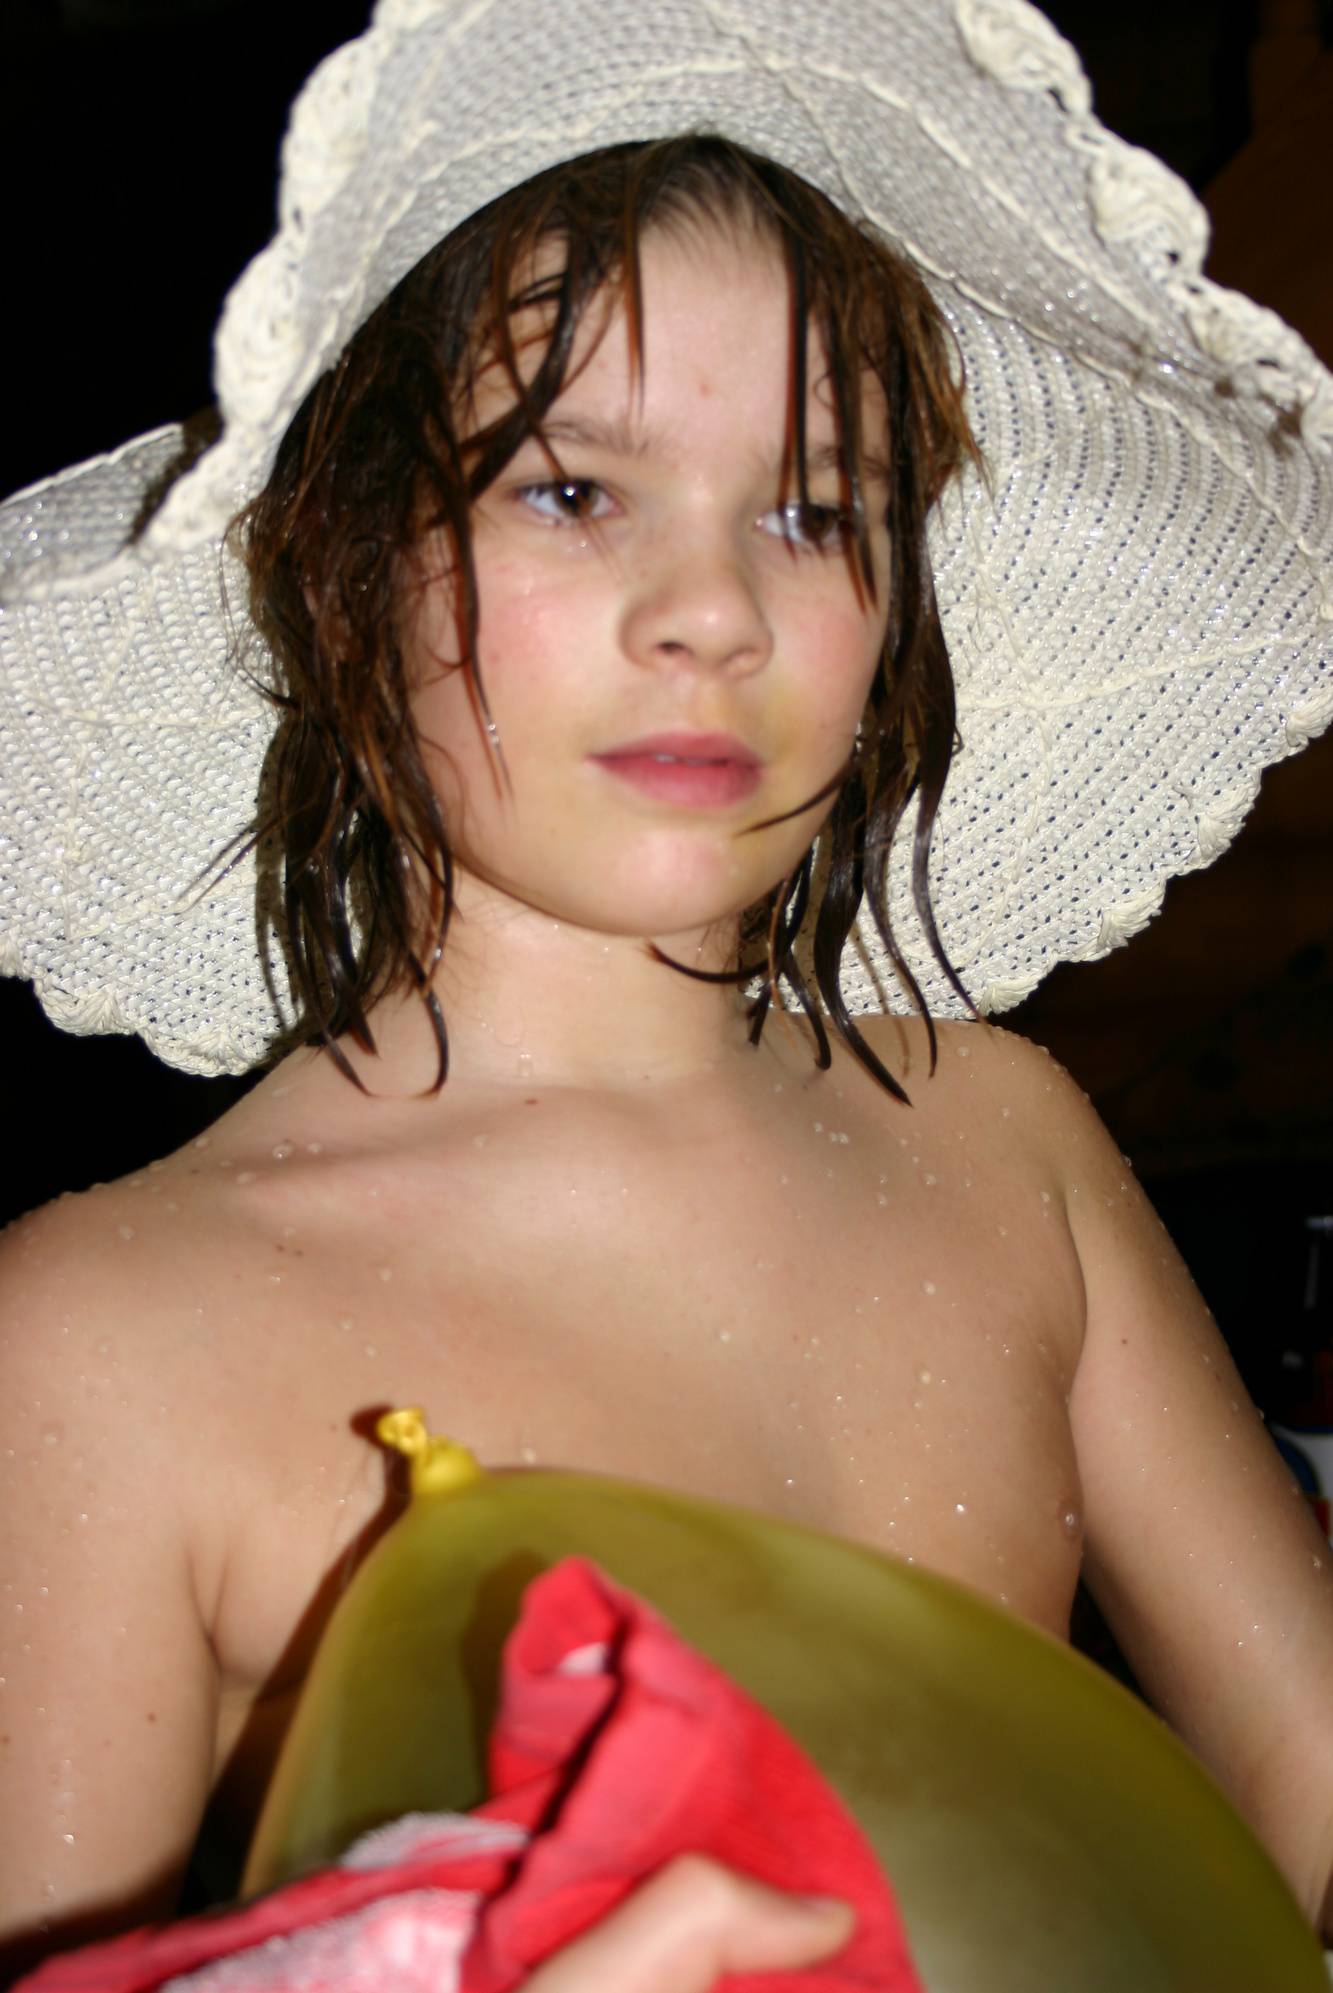 Pure Nudism Pics Easter Kids With Baskets - 2